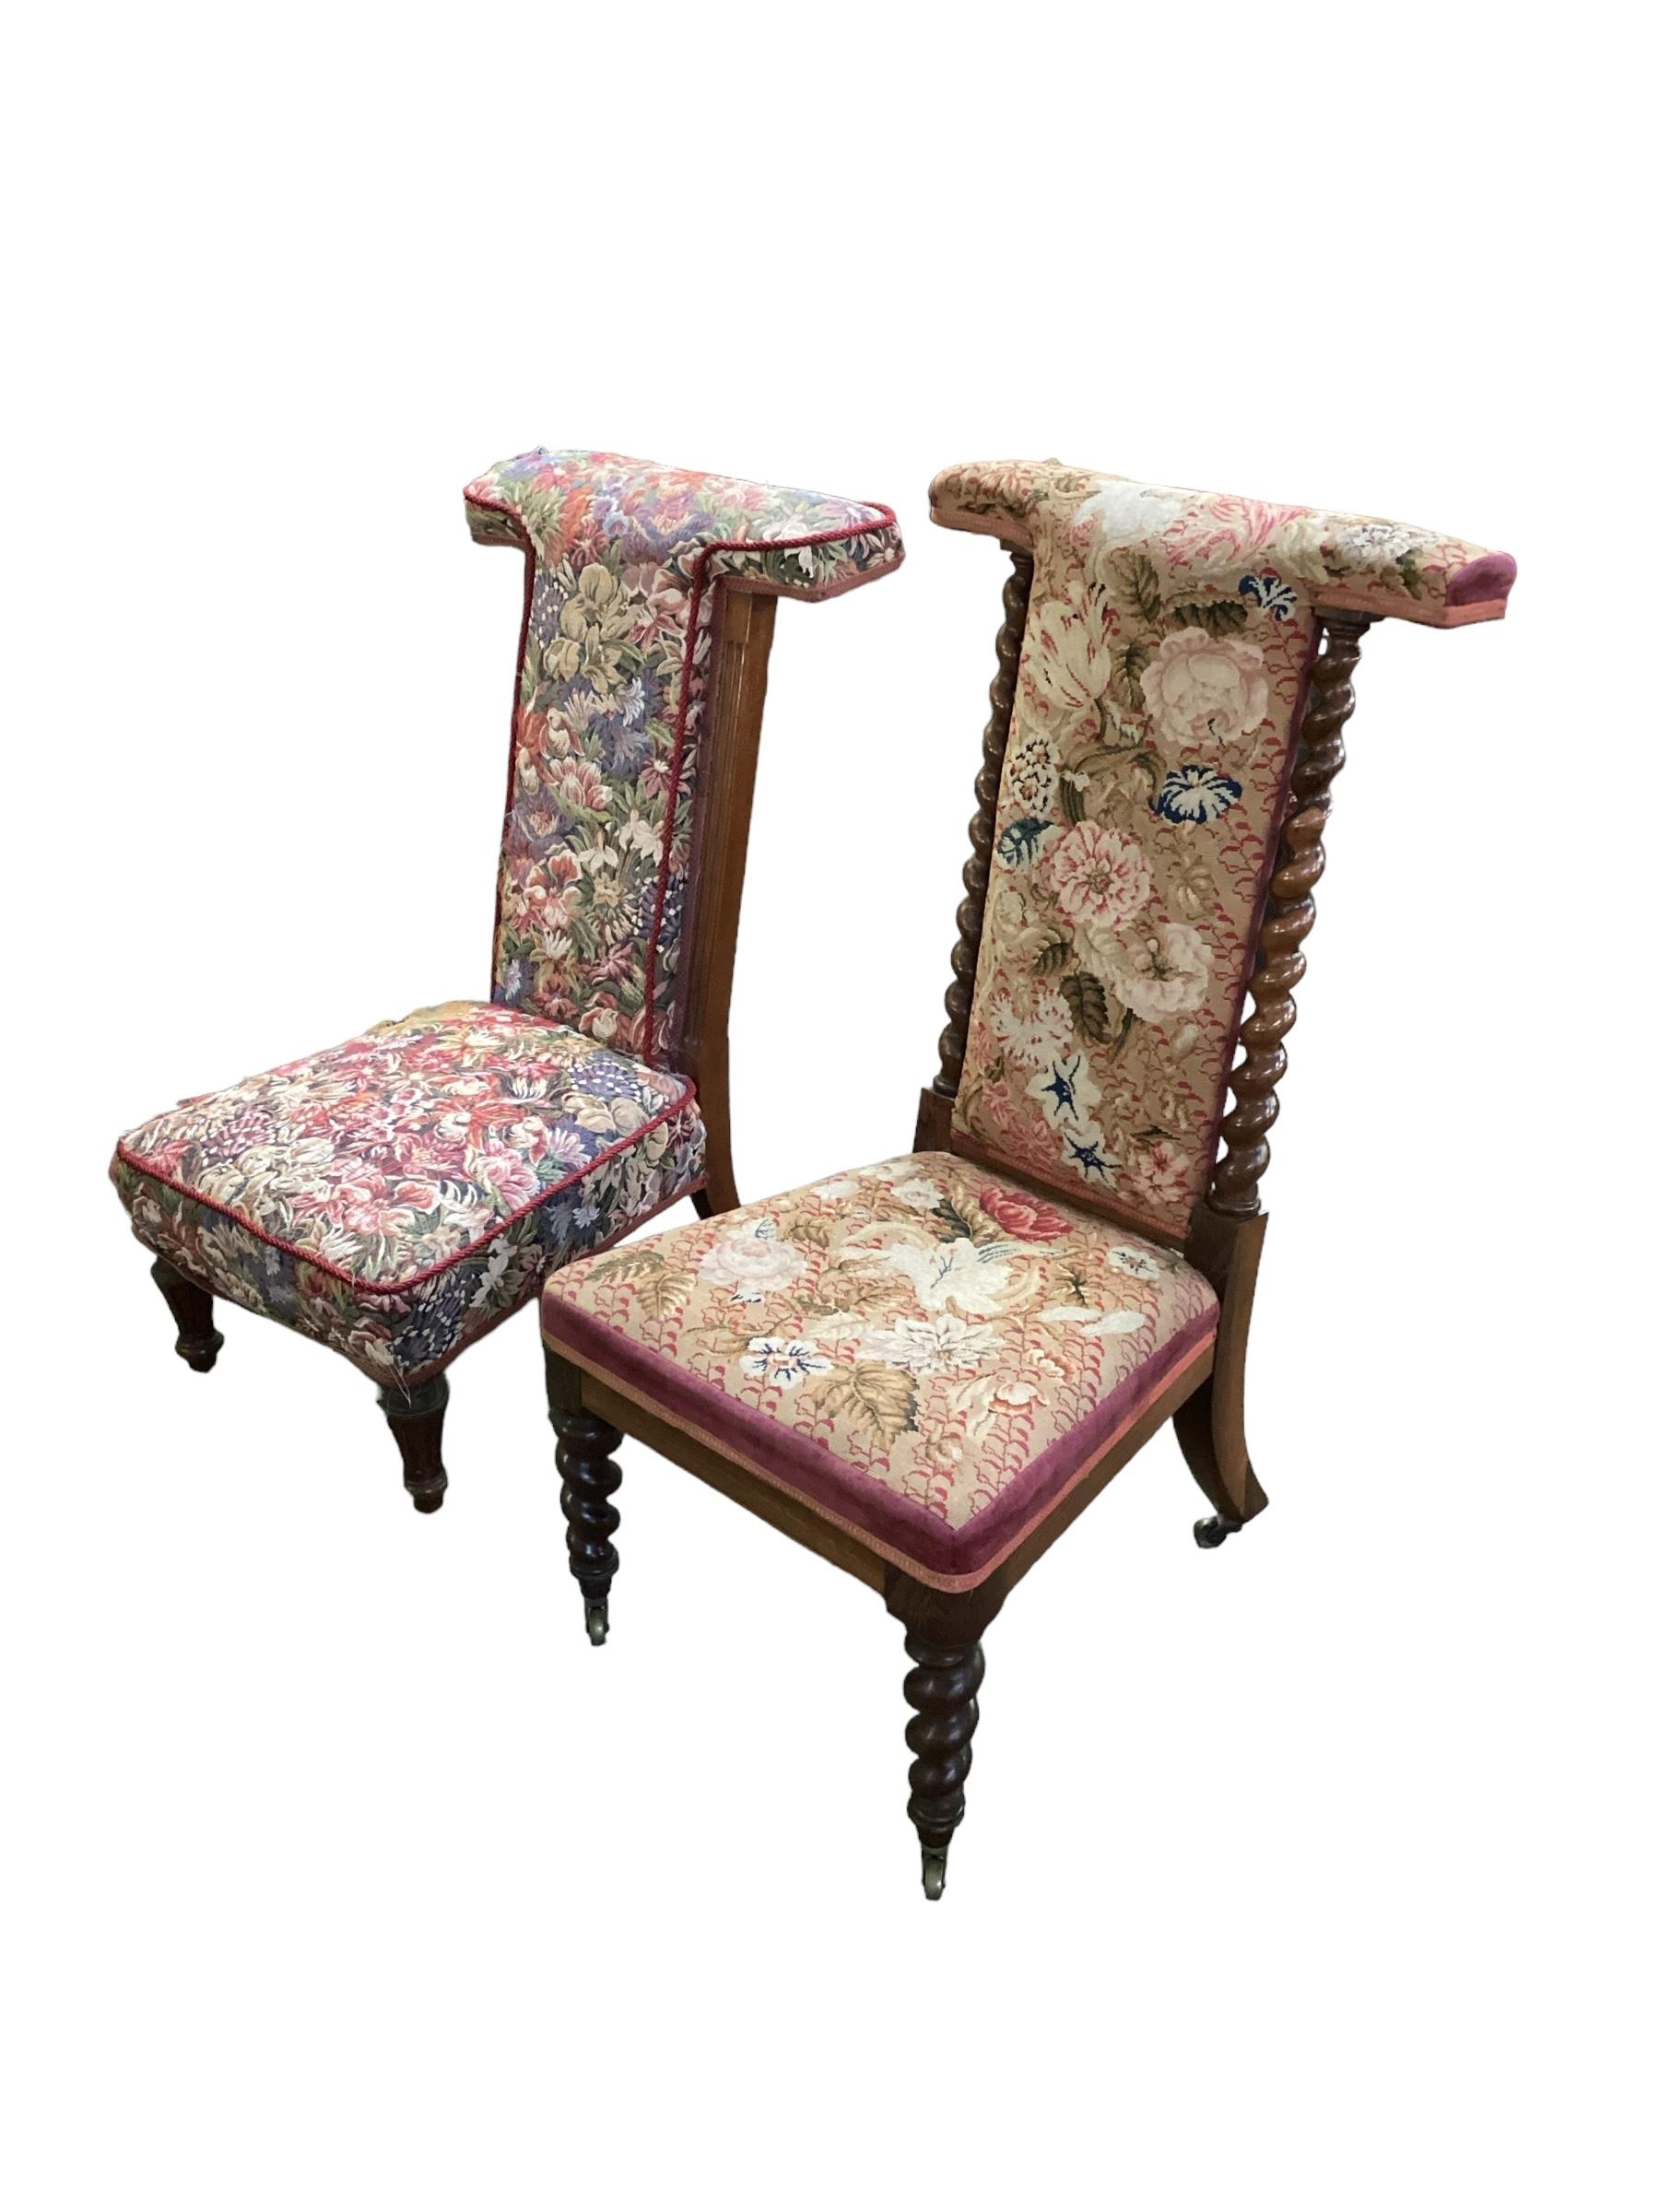 Victorian Prie Dieu chair with tapestry upholstery and barley twist sides; and Prie Dieu chair - Image 2 of 14